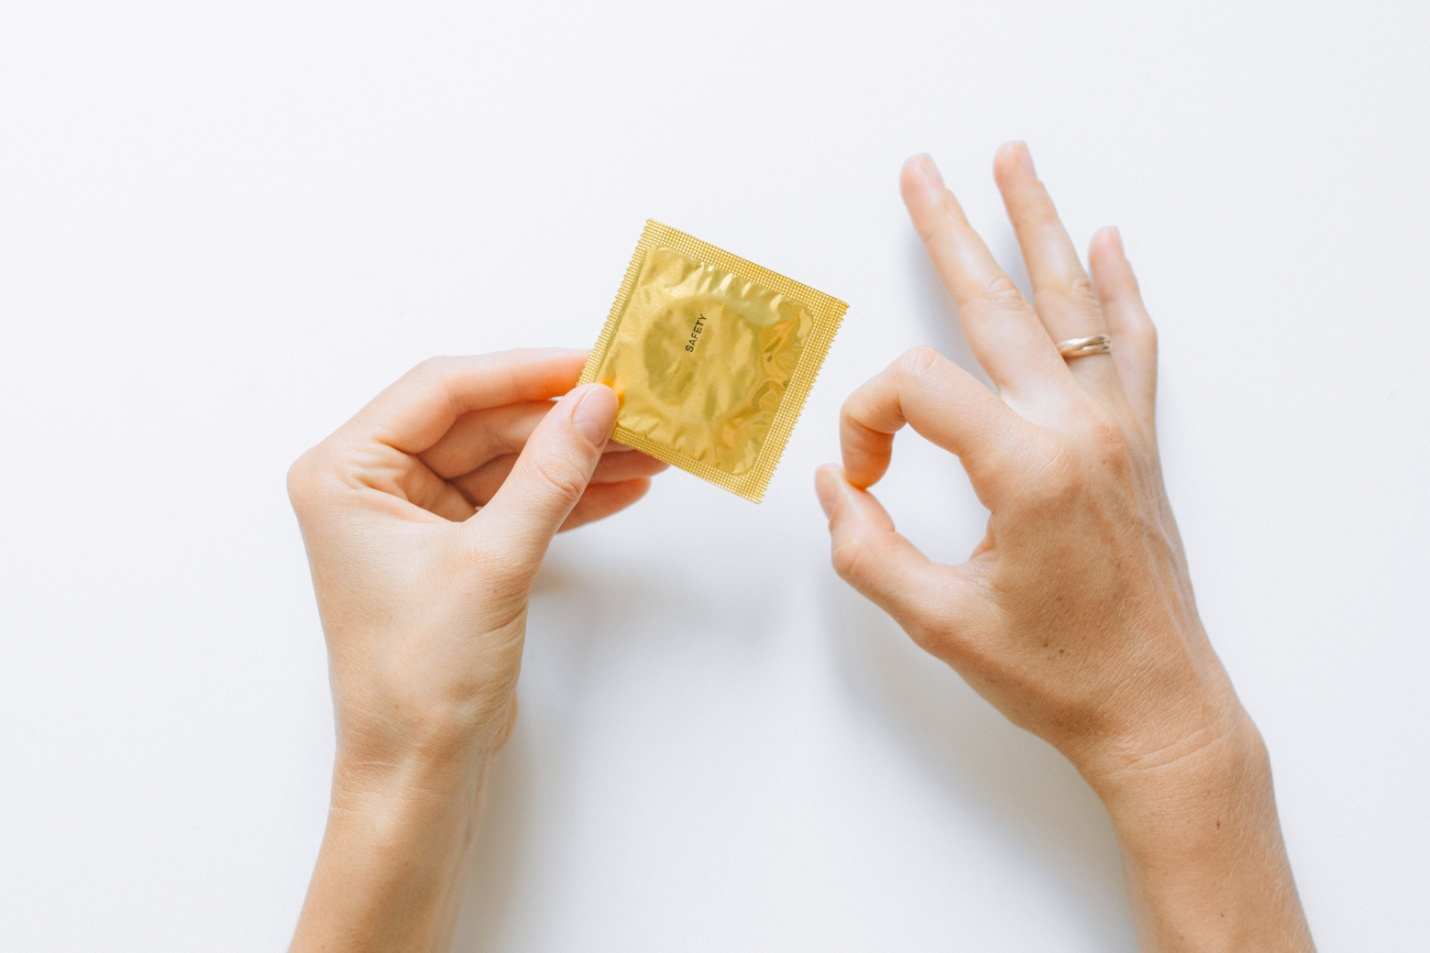 A pair of hands holding a wrapped condom in golden packaging